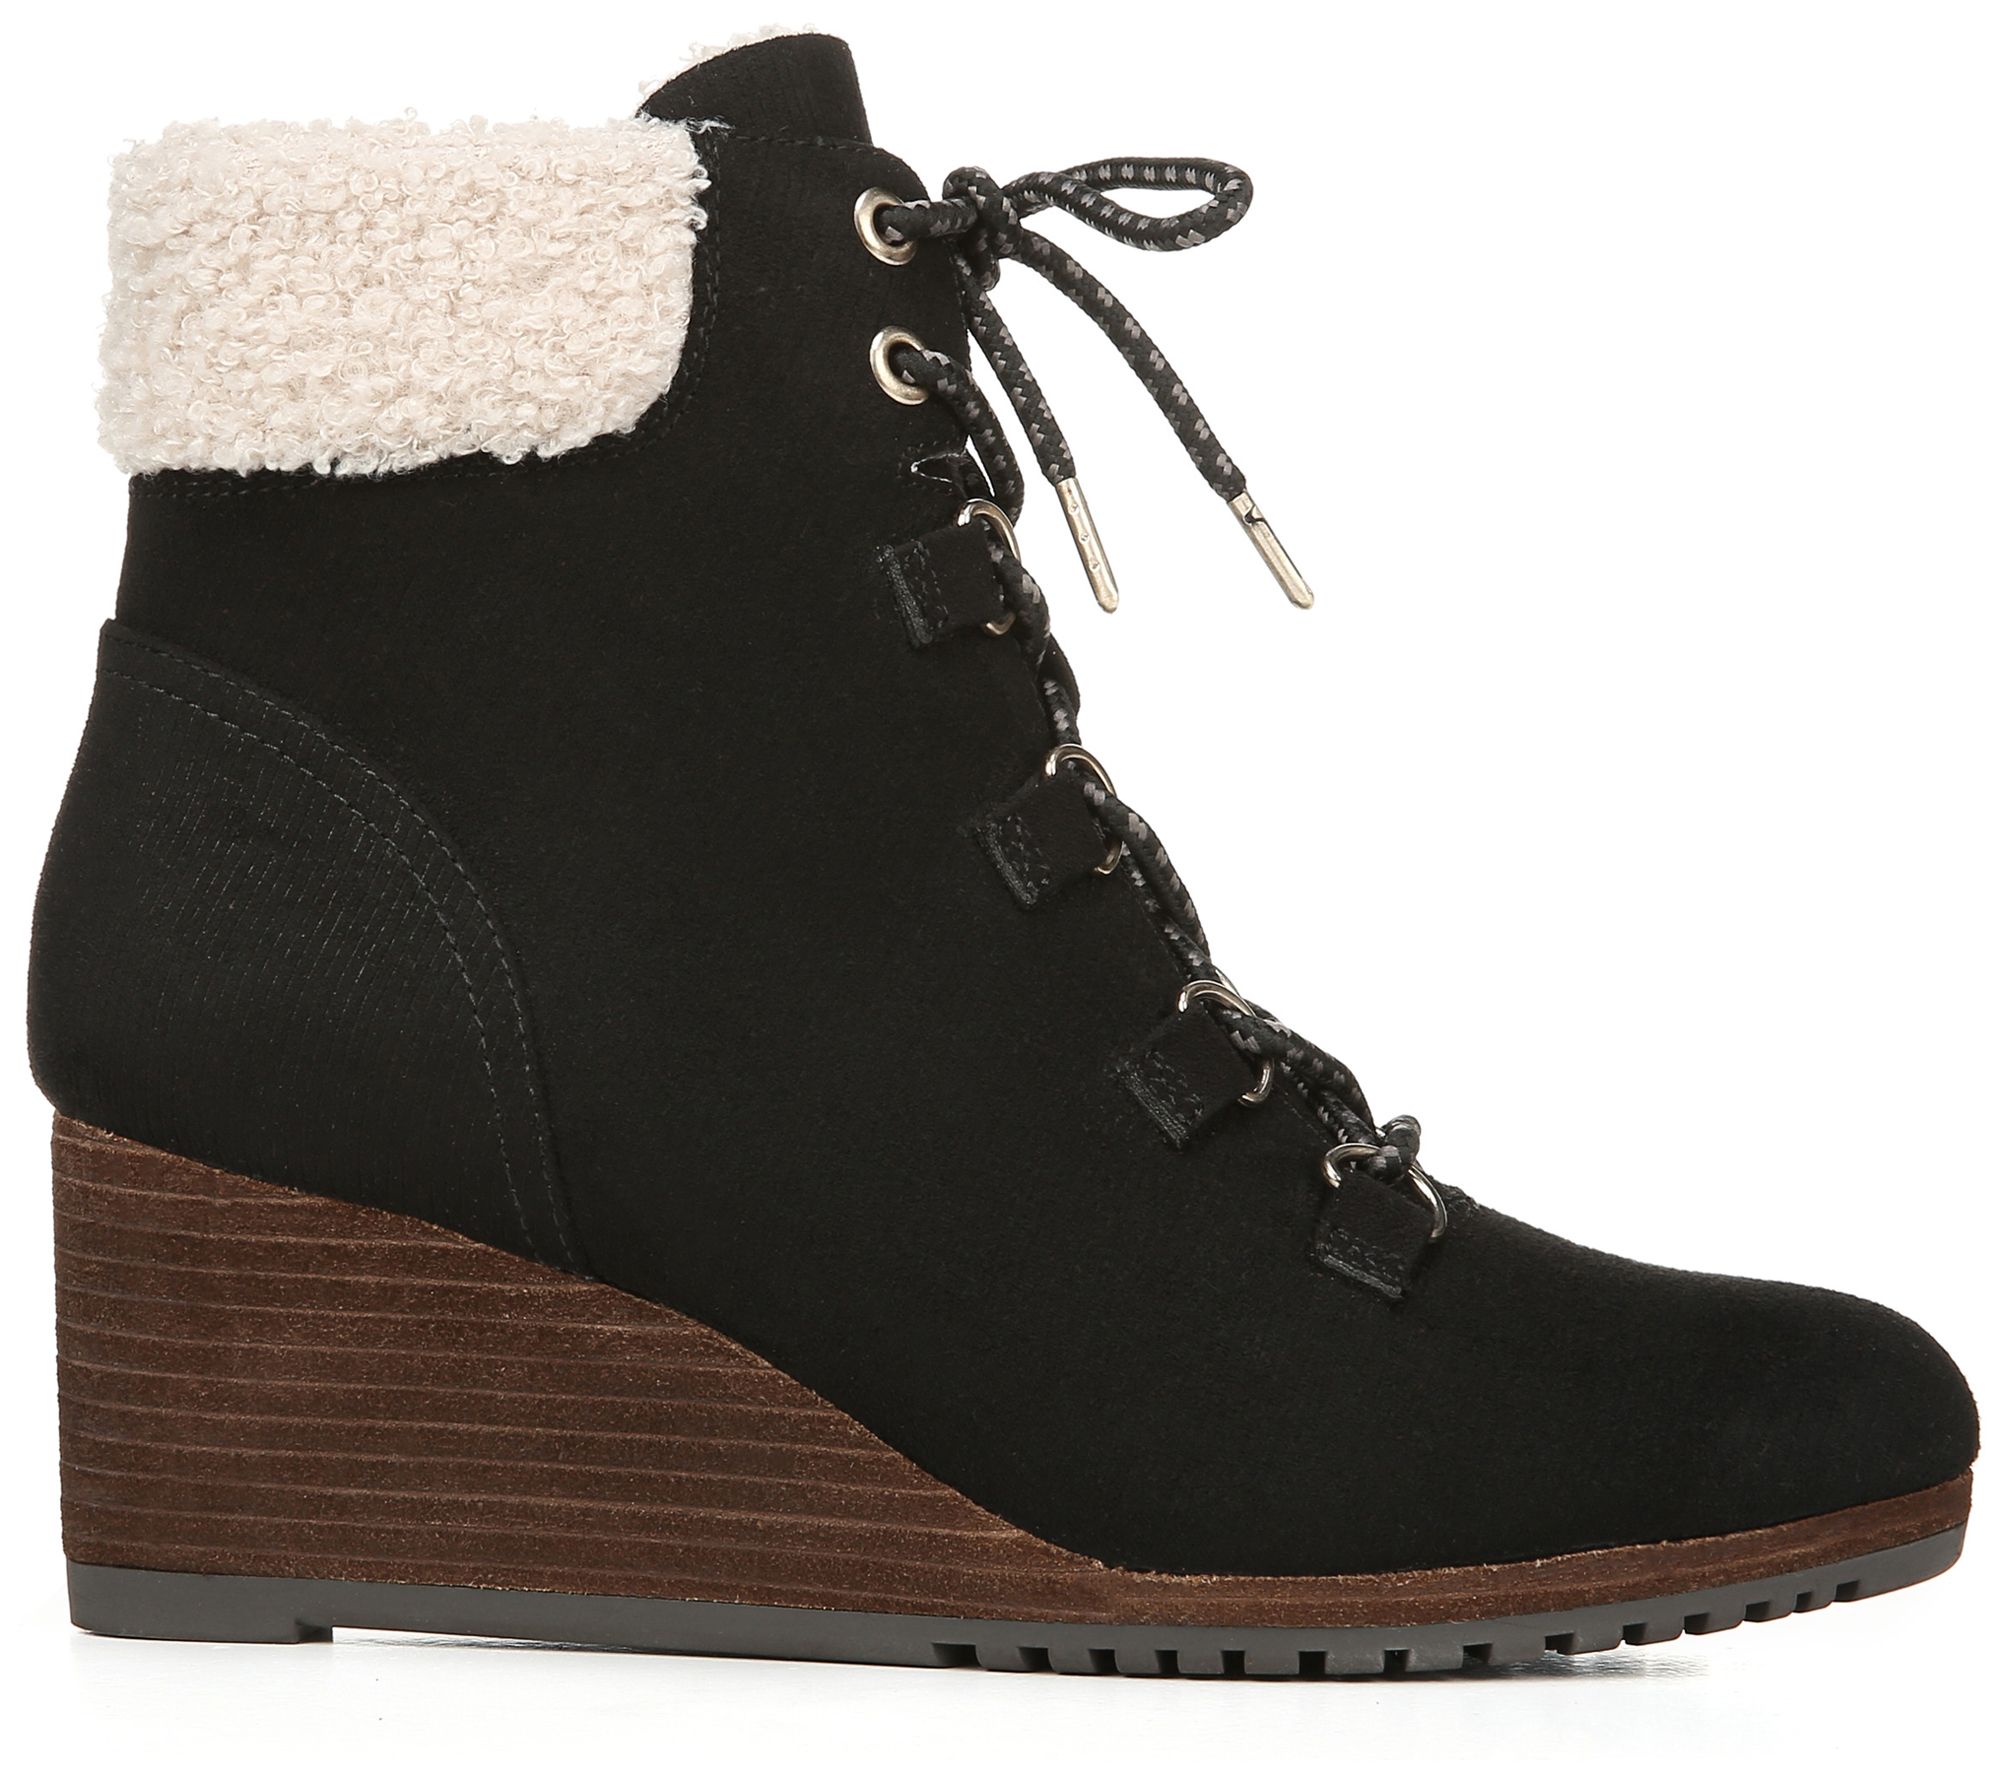 Dr. Scholl's Faux Fur Lace-Up Wedge Booties - Charmer - QVC.com